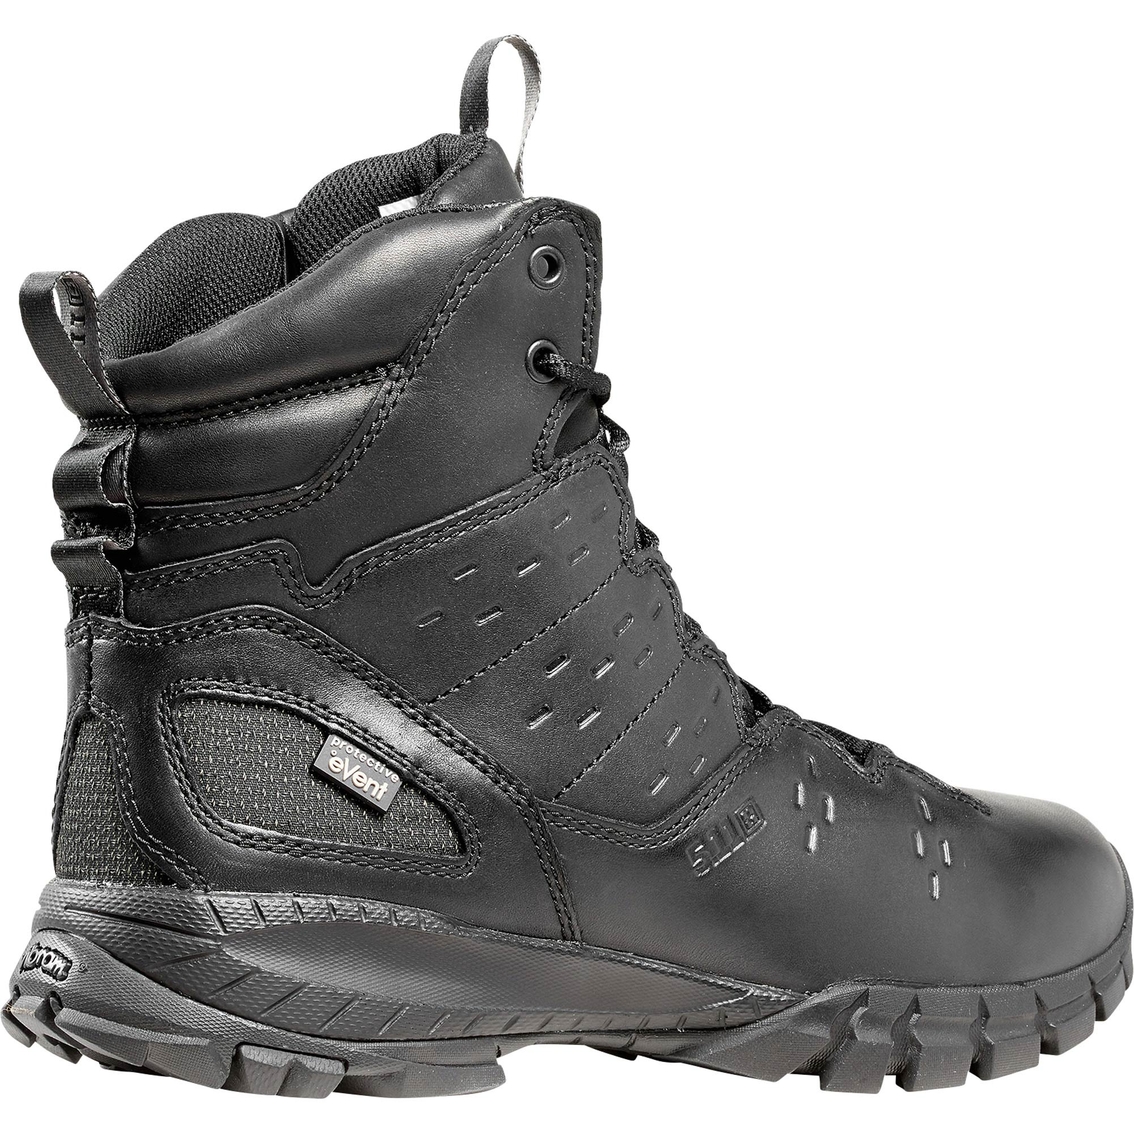 5.11 Men's Xprt 3.0 Black 6 in. Boots - Image 4 of 8